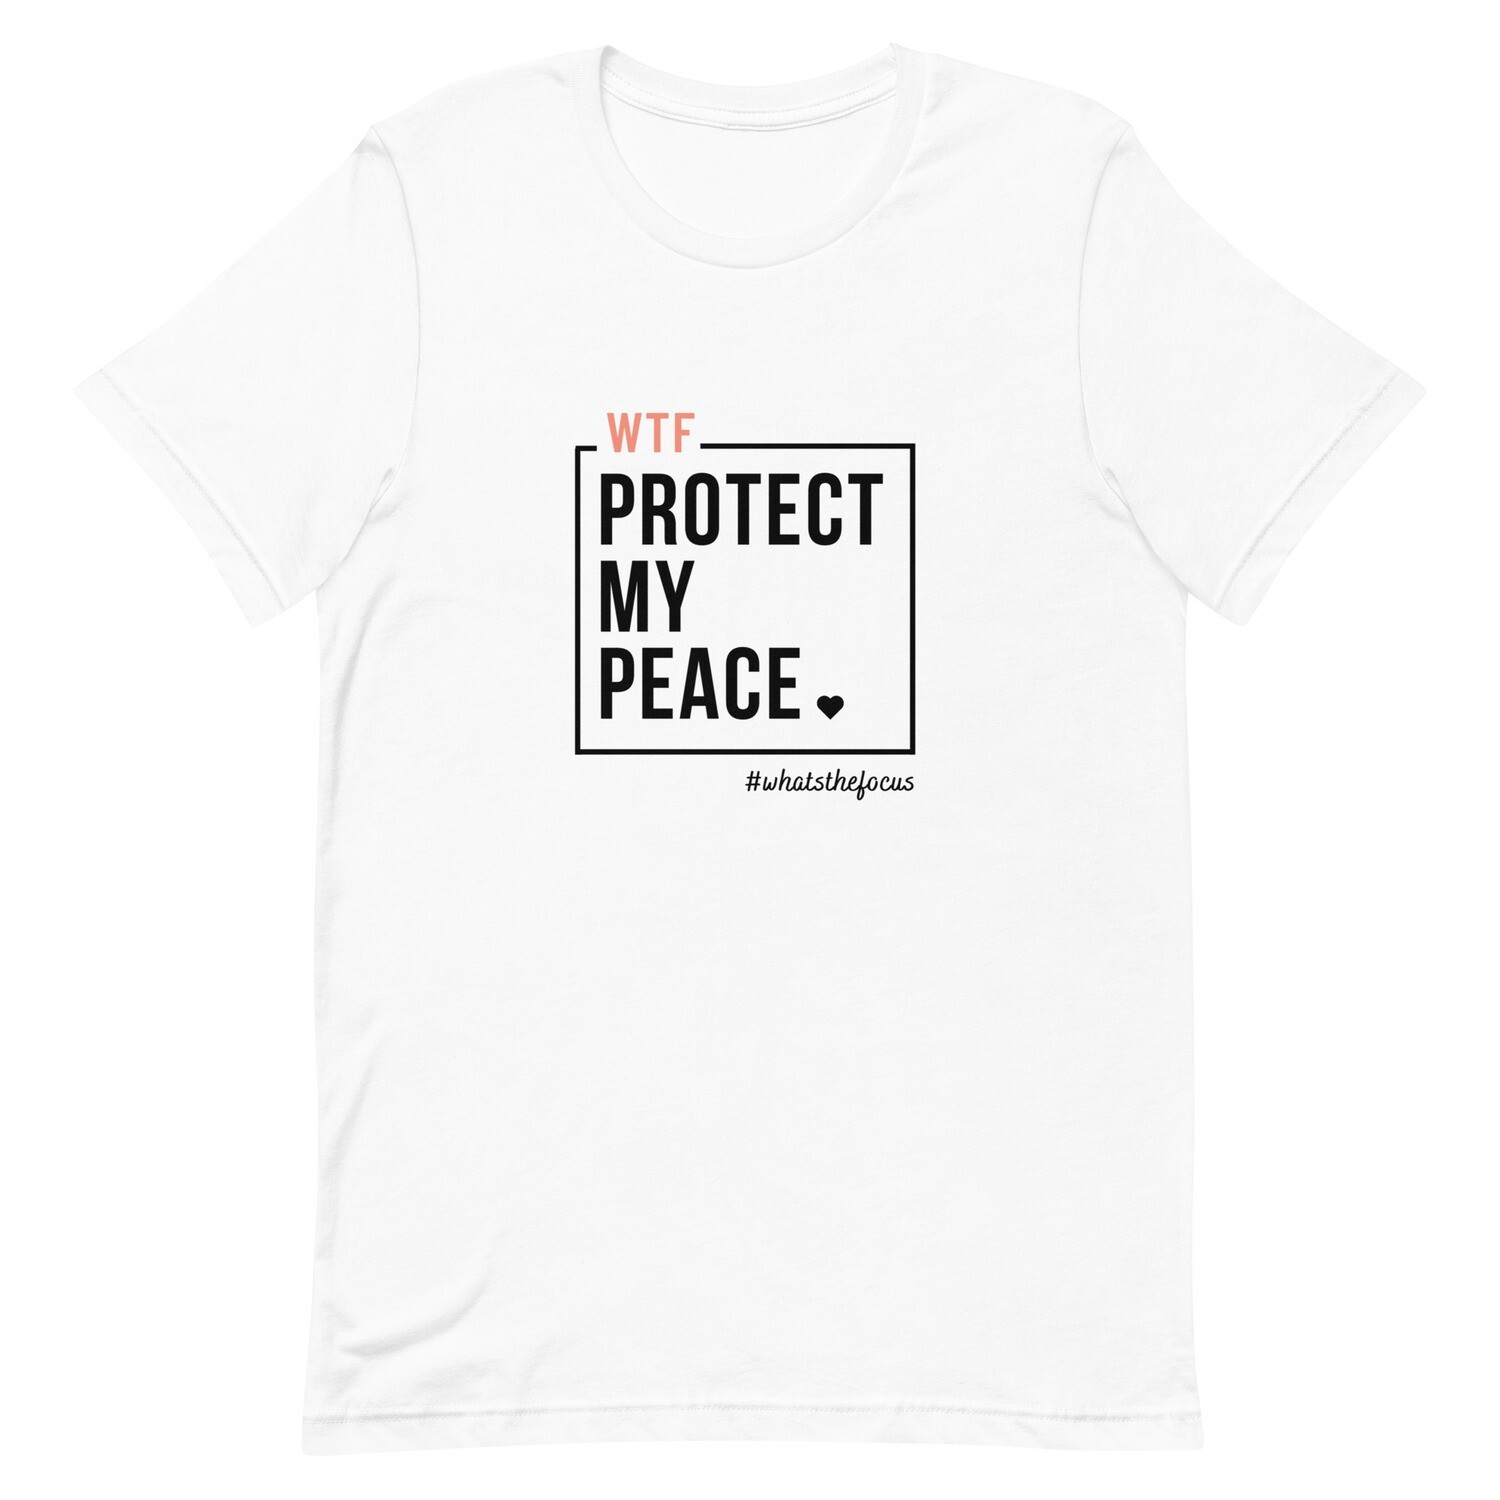 Protect My Peace - White & Coral Unisex Tee